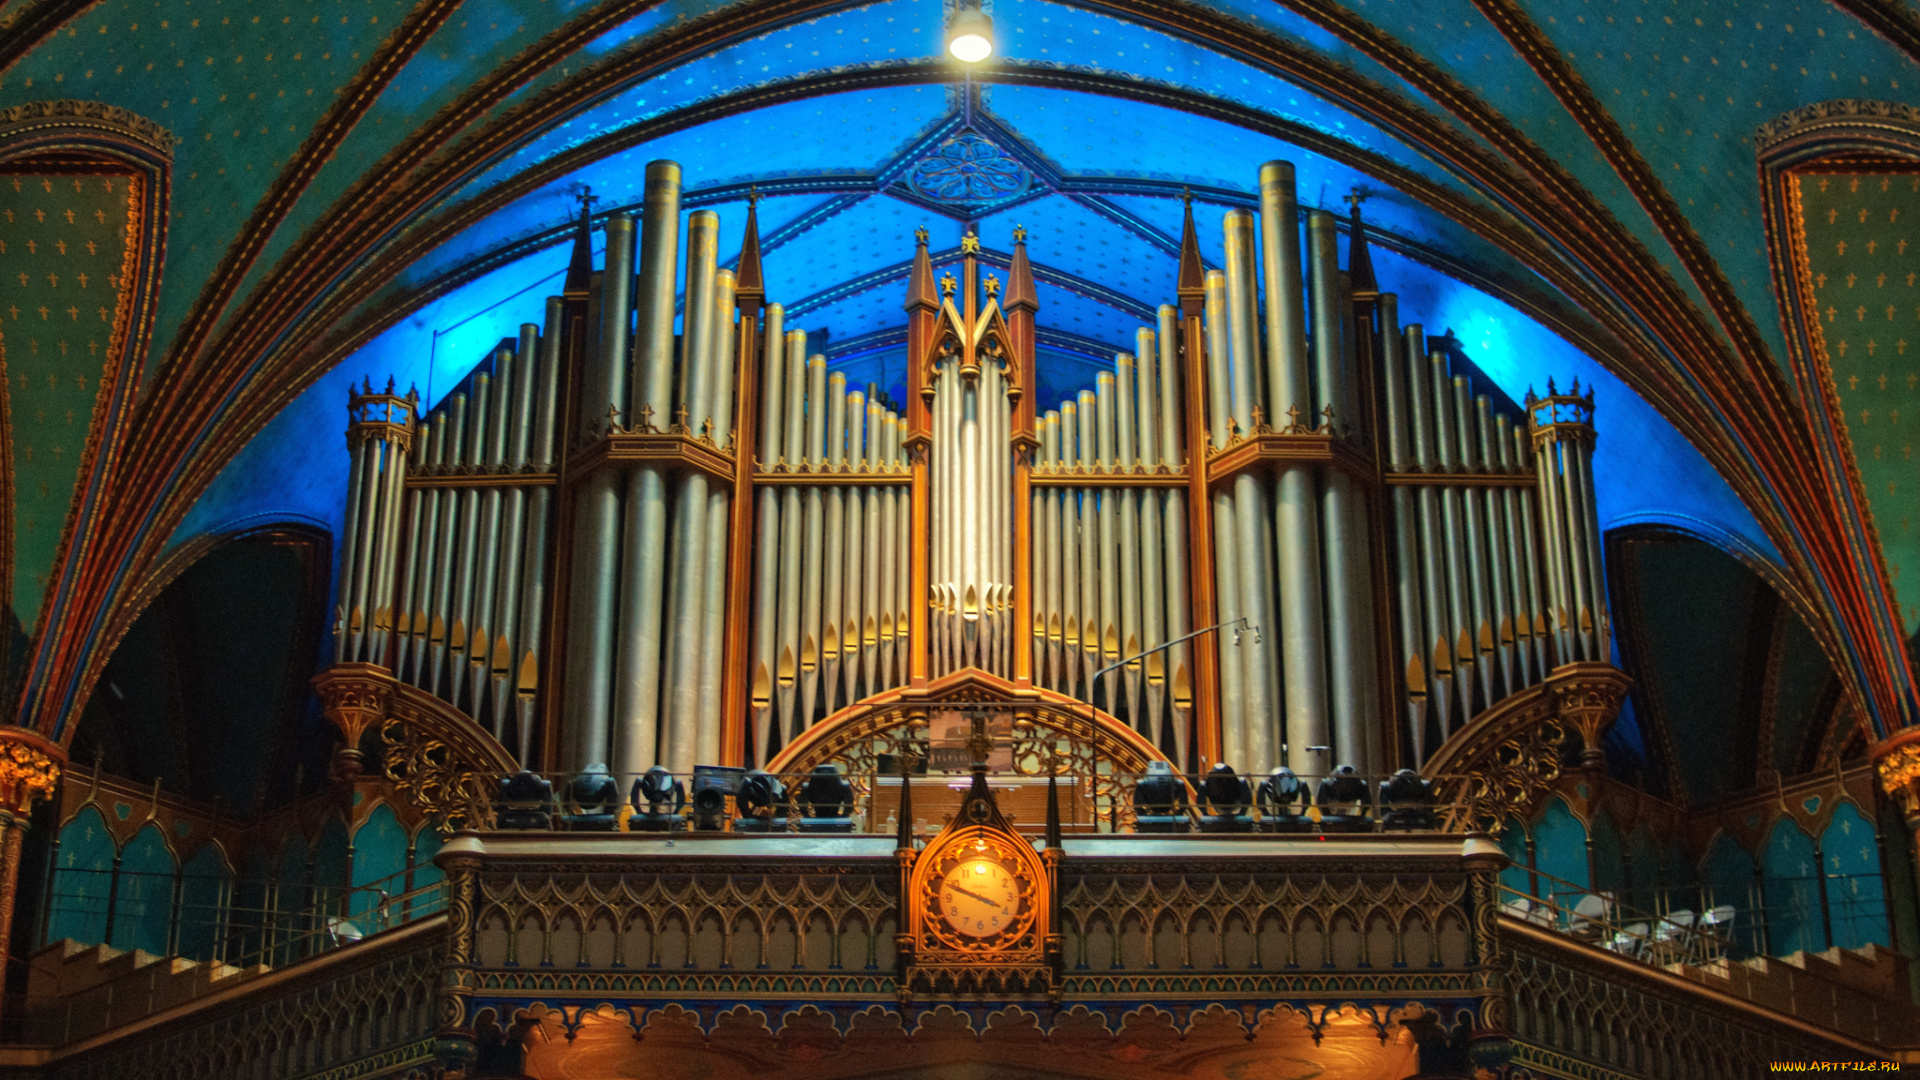 the, organ, pipes, from, the, cathedral, of, notre, dame, in, old, montreal, музыка, -музыкальные, инструменты, собор, орган